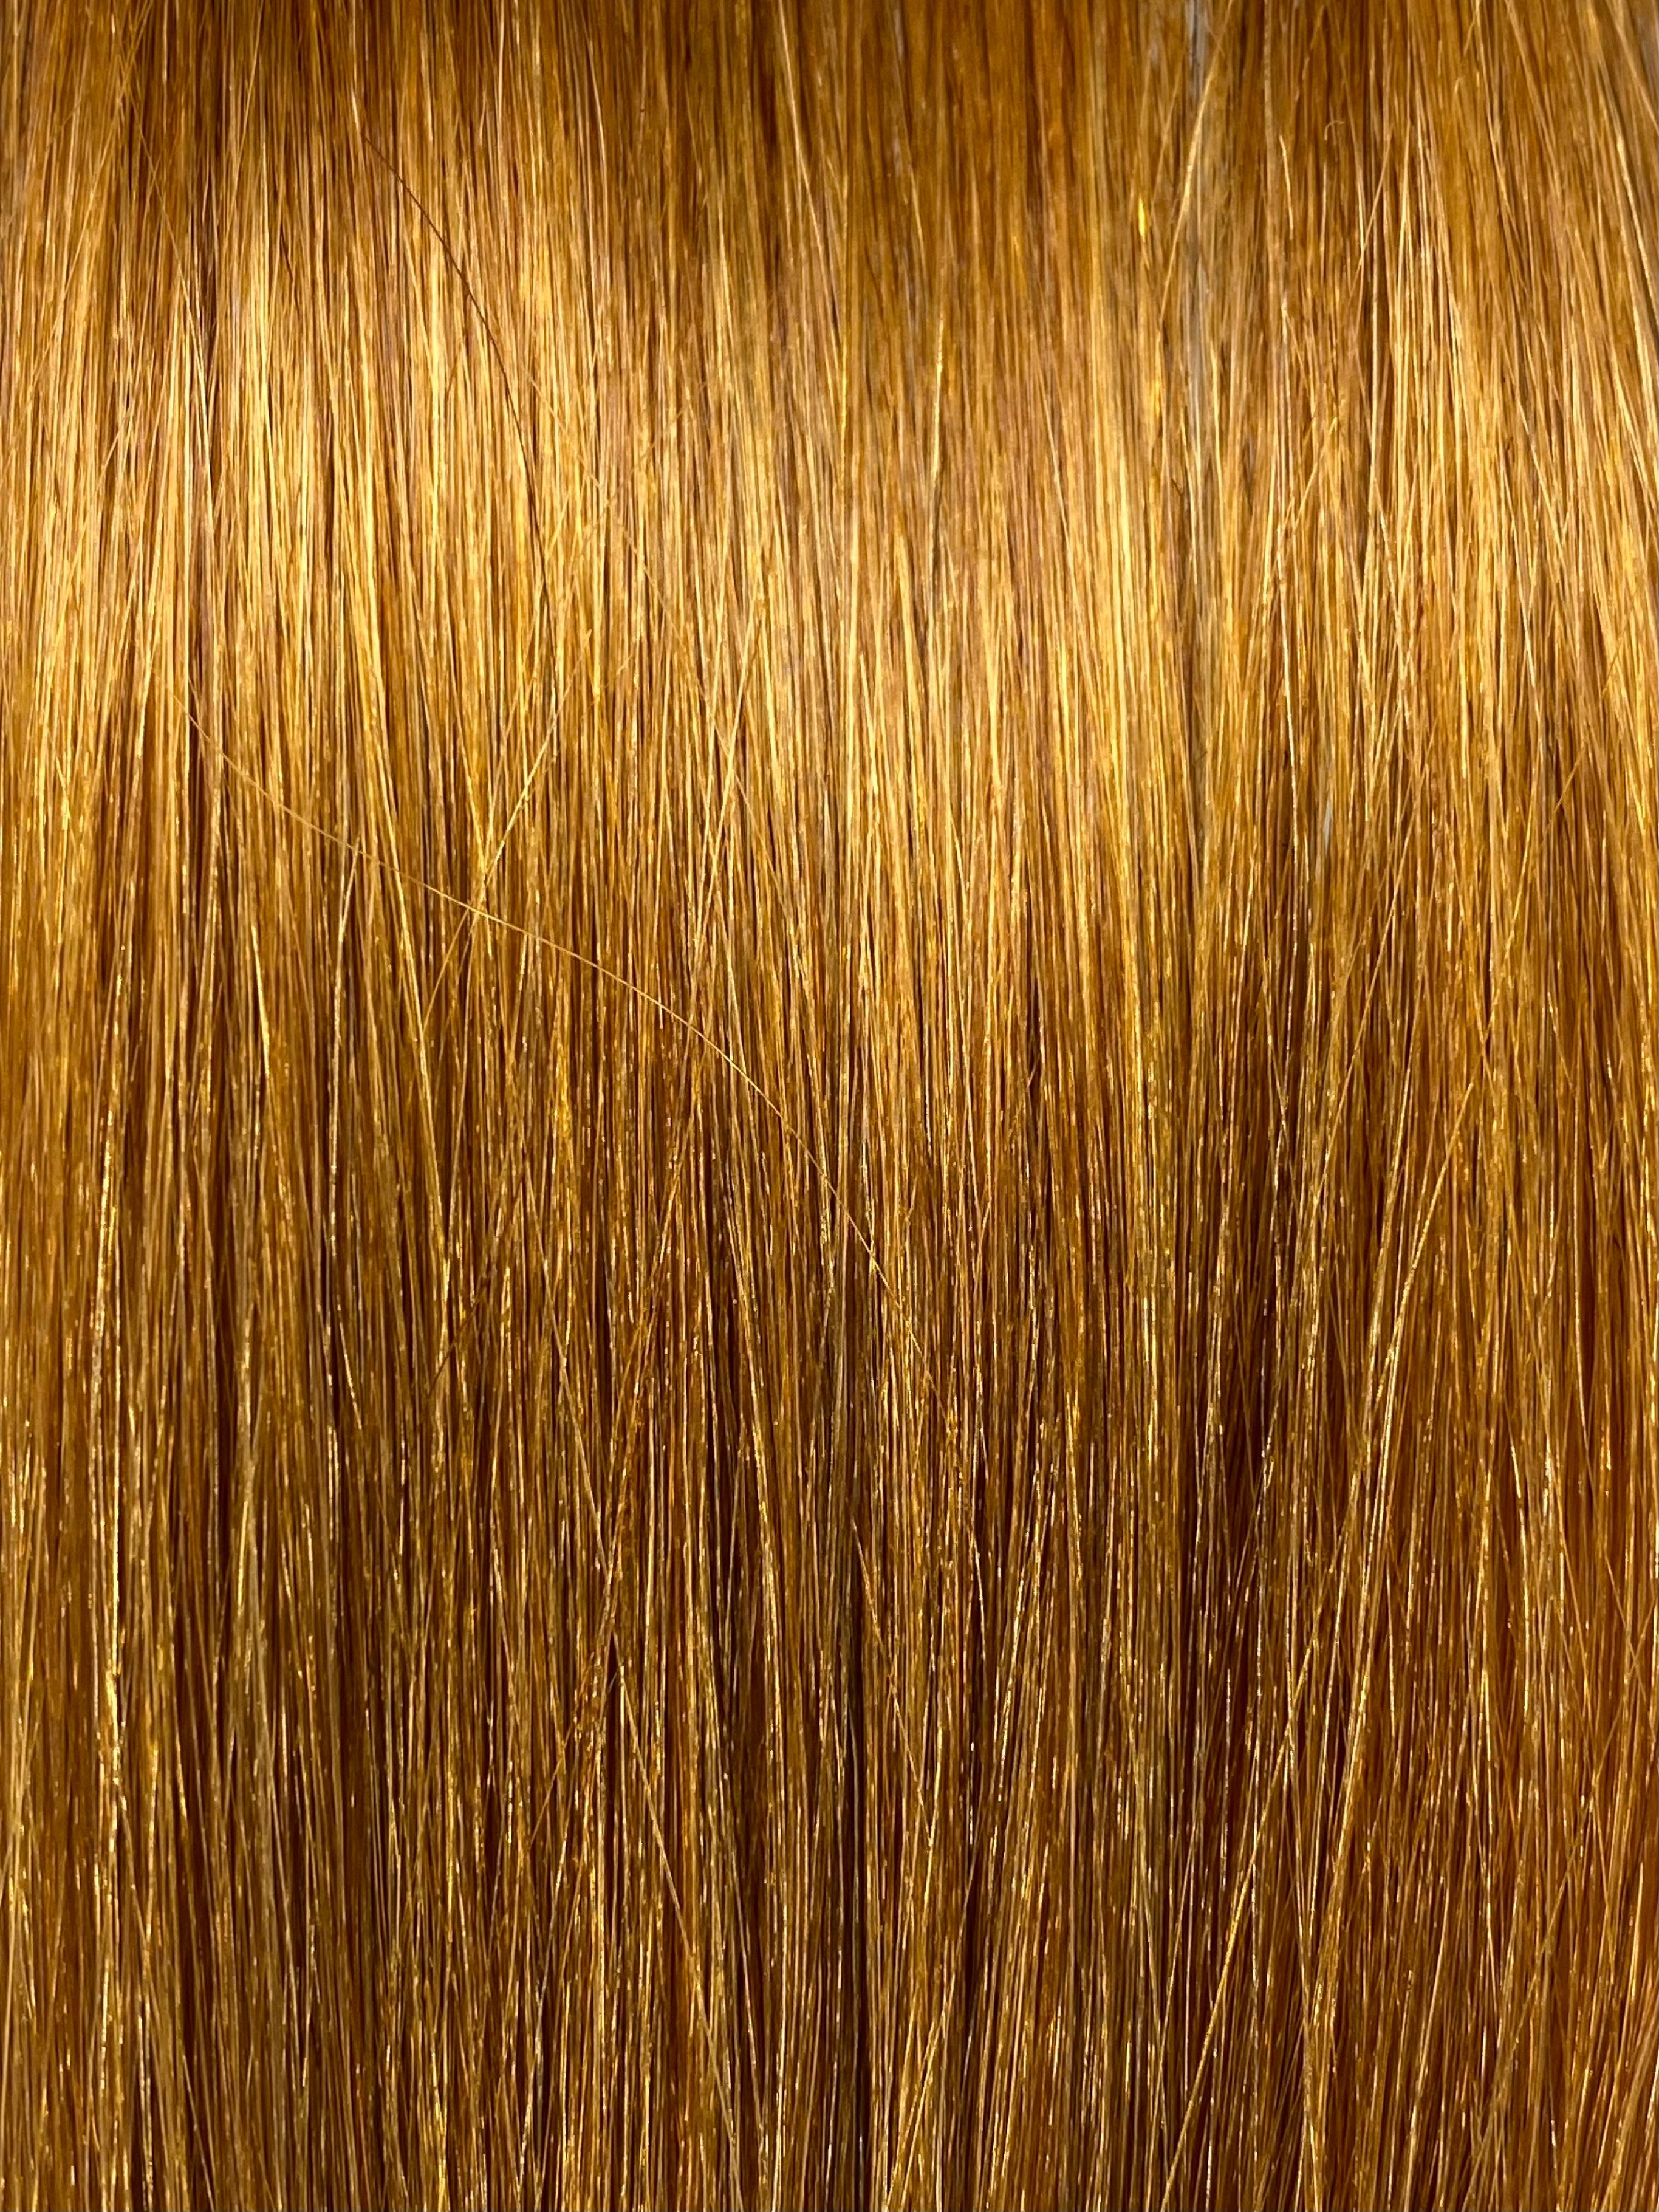 50% OFF Tape #27 - 40cm/ 16 Inches Golden Blonde - 16 Grams